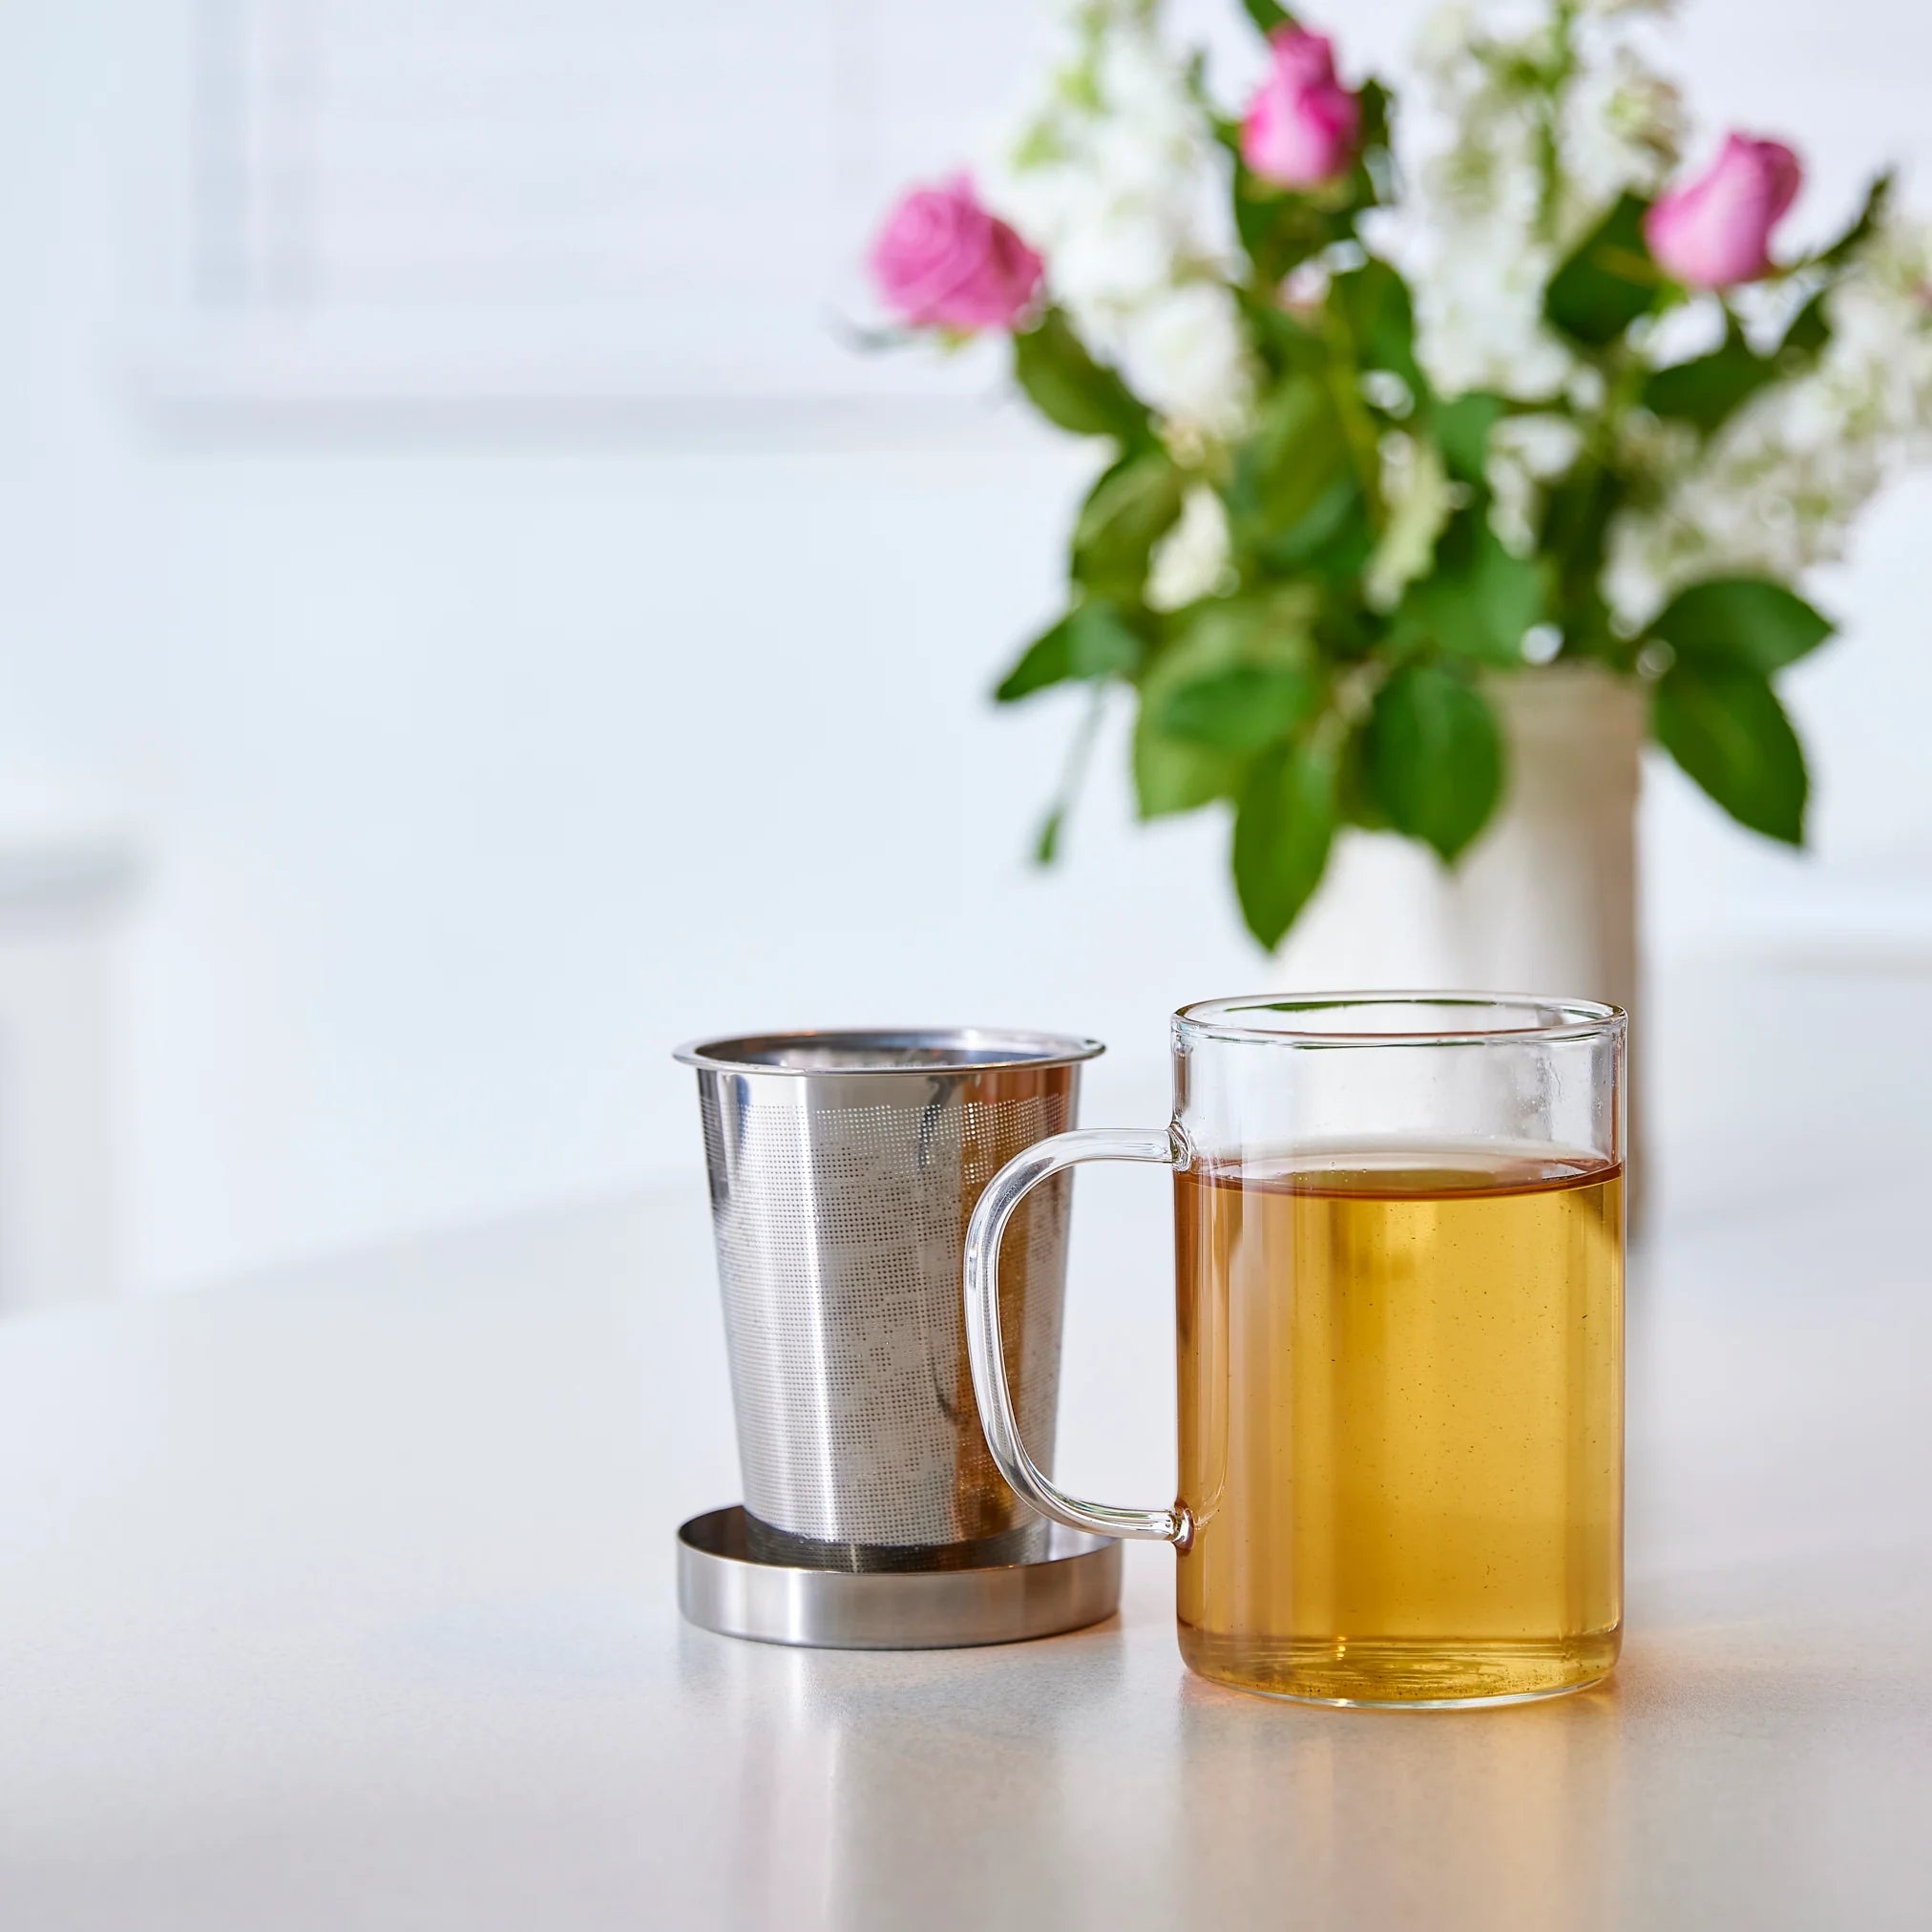 A Forage + Bloom heat-resistant glass tea cup filled with amber tea beside a Forage + Bloom stainless steel infuser for loose leaf brewing on a white surface, with a vase of roses in the soft-focus background.